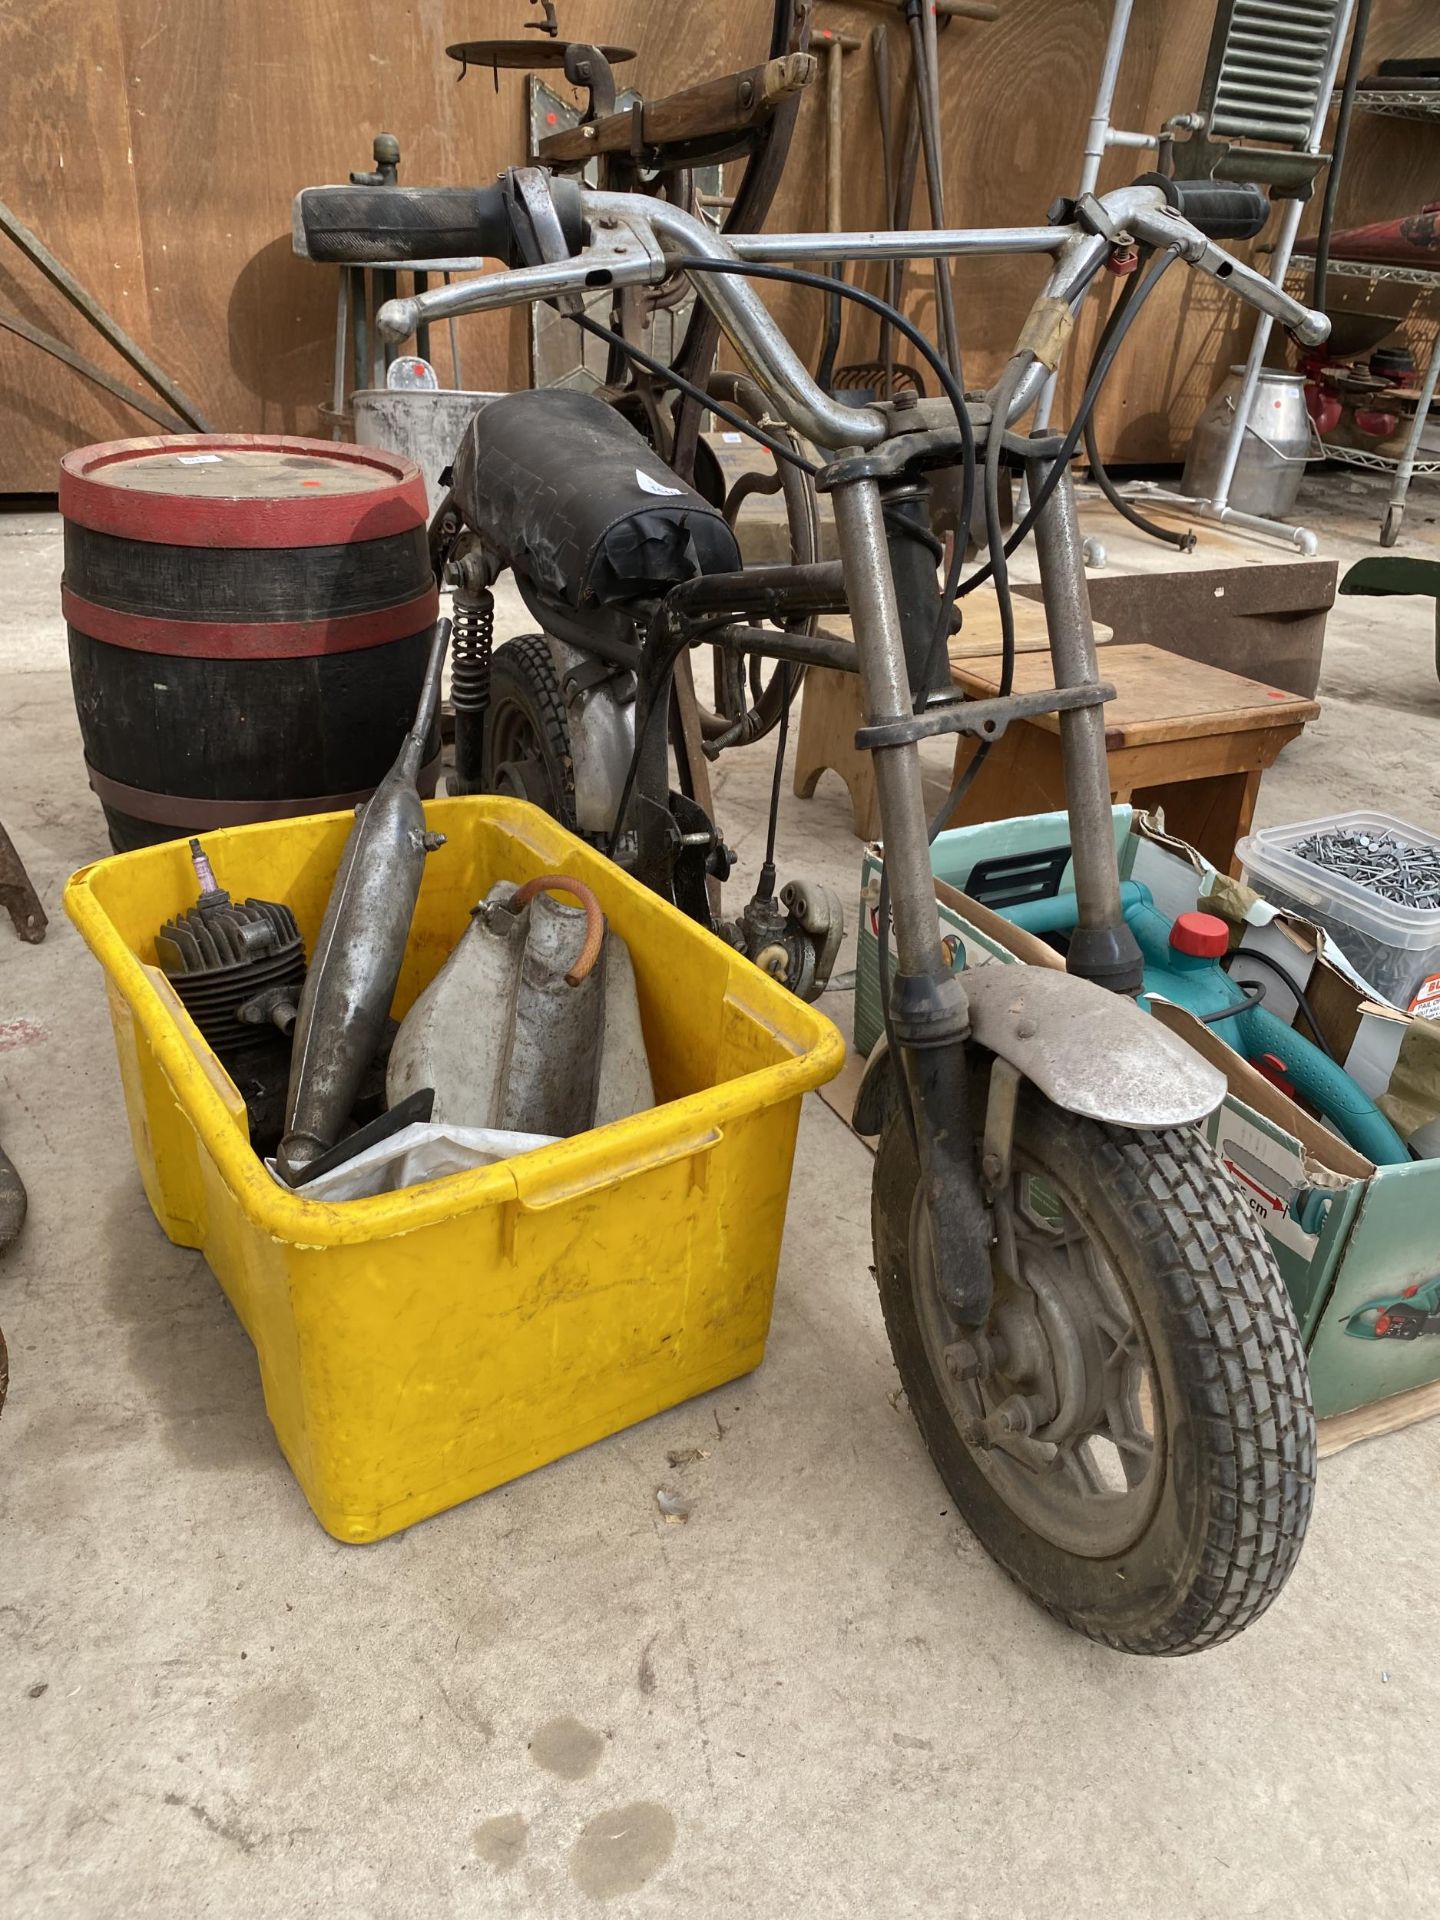 A SMALL MOTORBIKE AND SPARE PARTS FOR RESTORATION